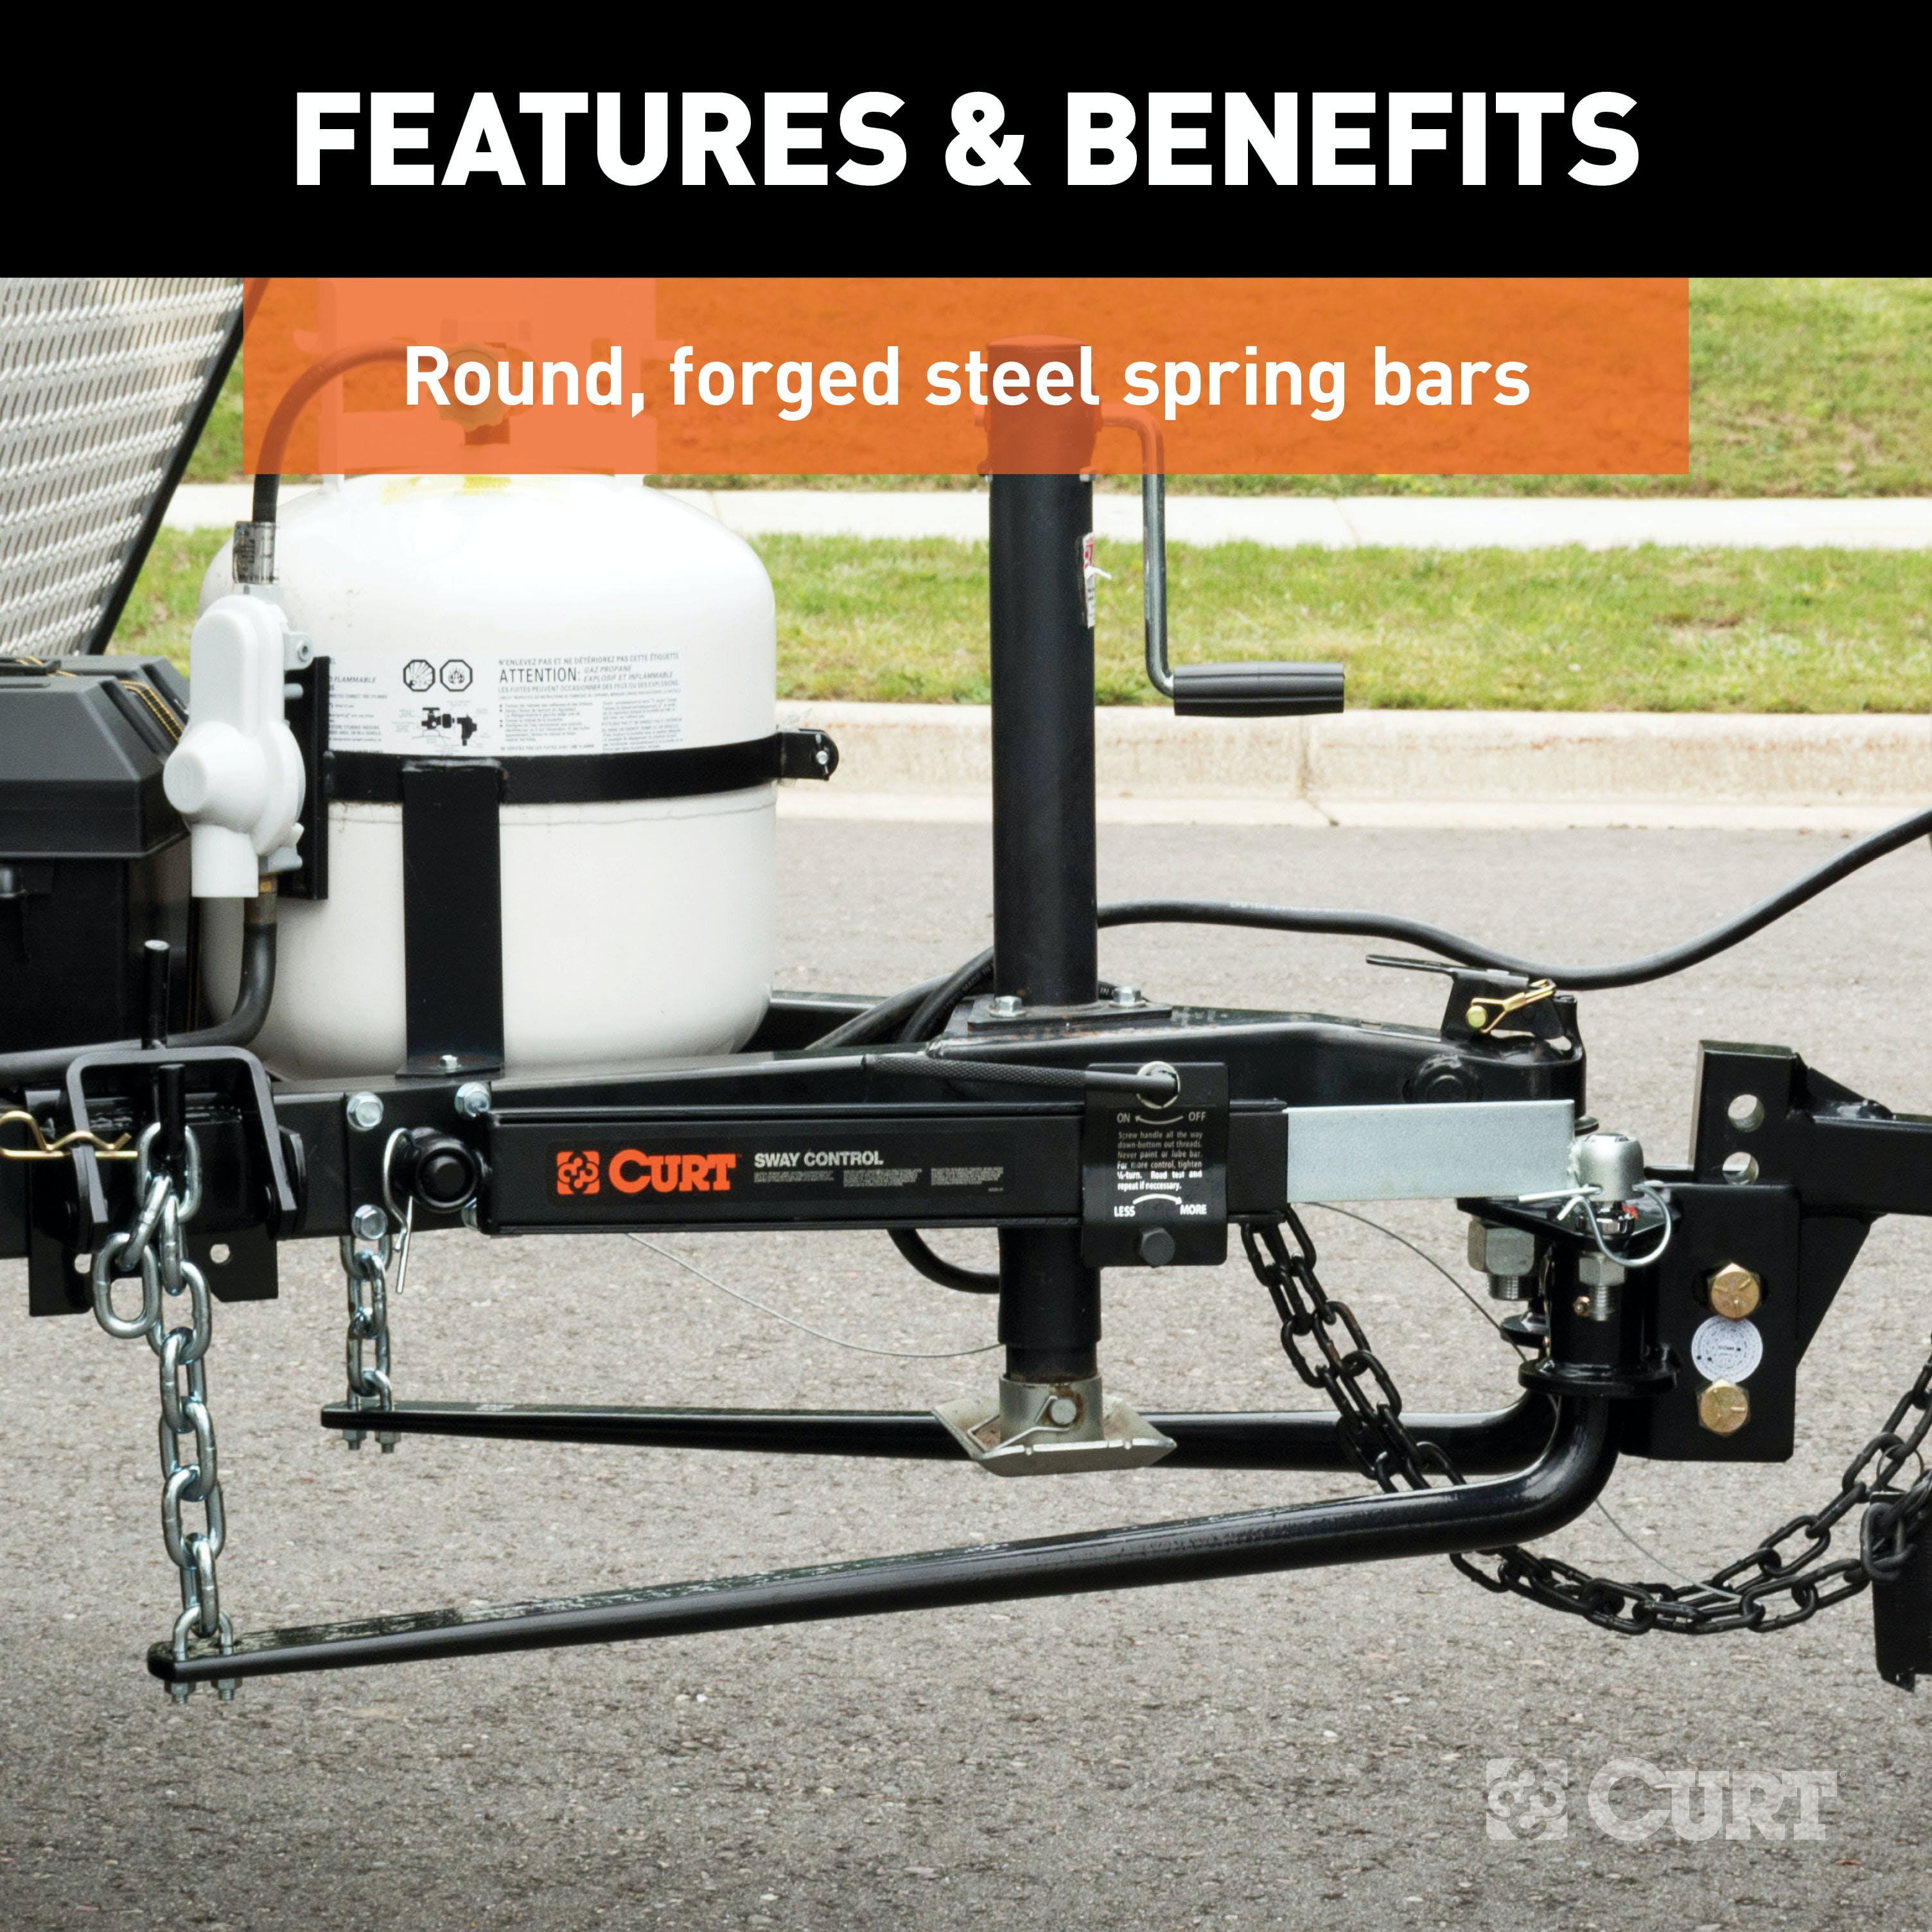 CURT 17052 Round Bar Weight Distribution Hitch with Integrated Lubrication (8-10K)